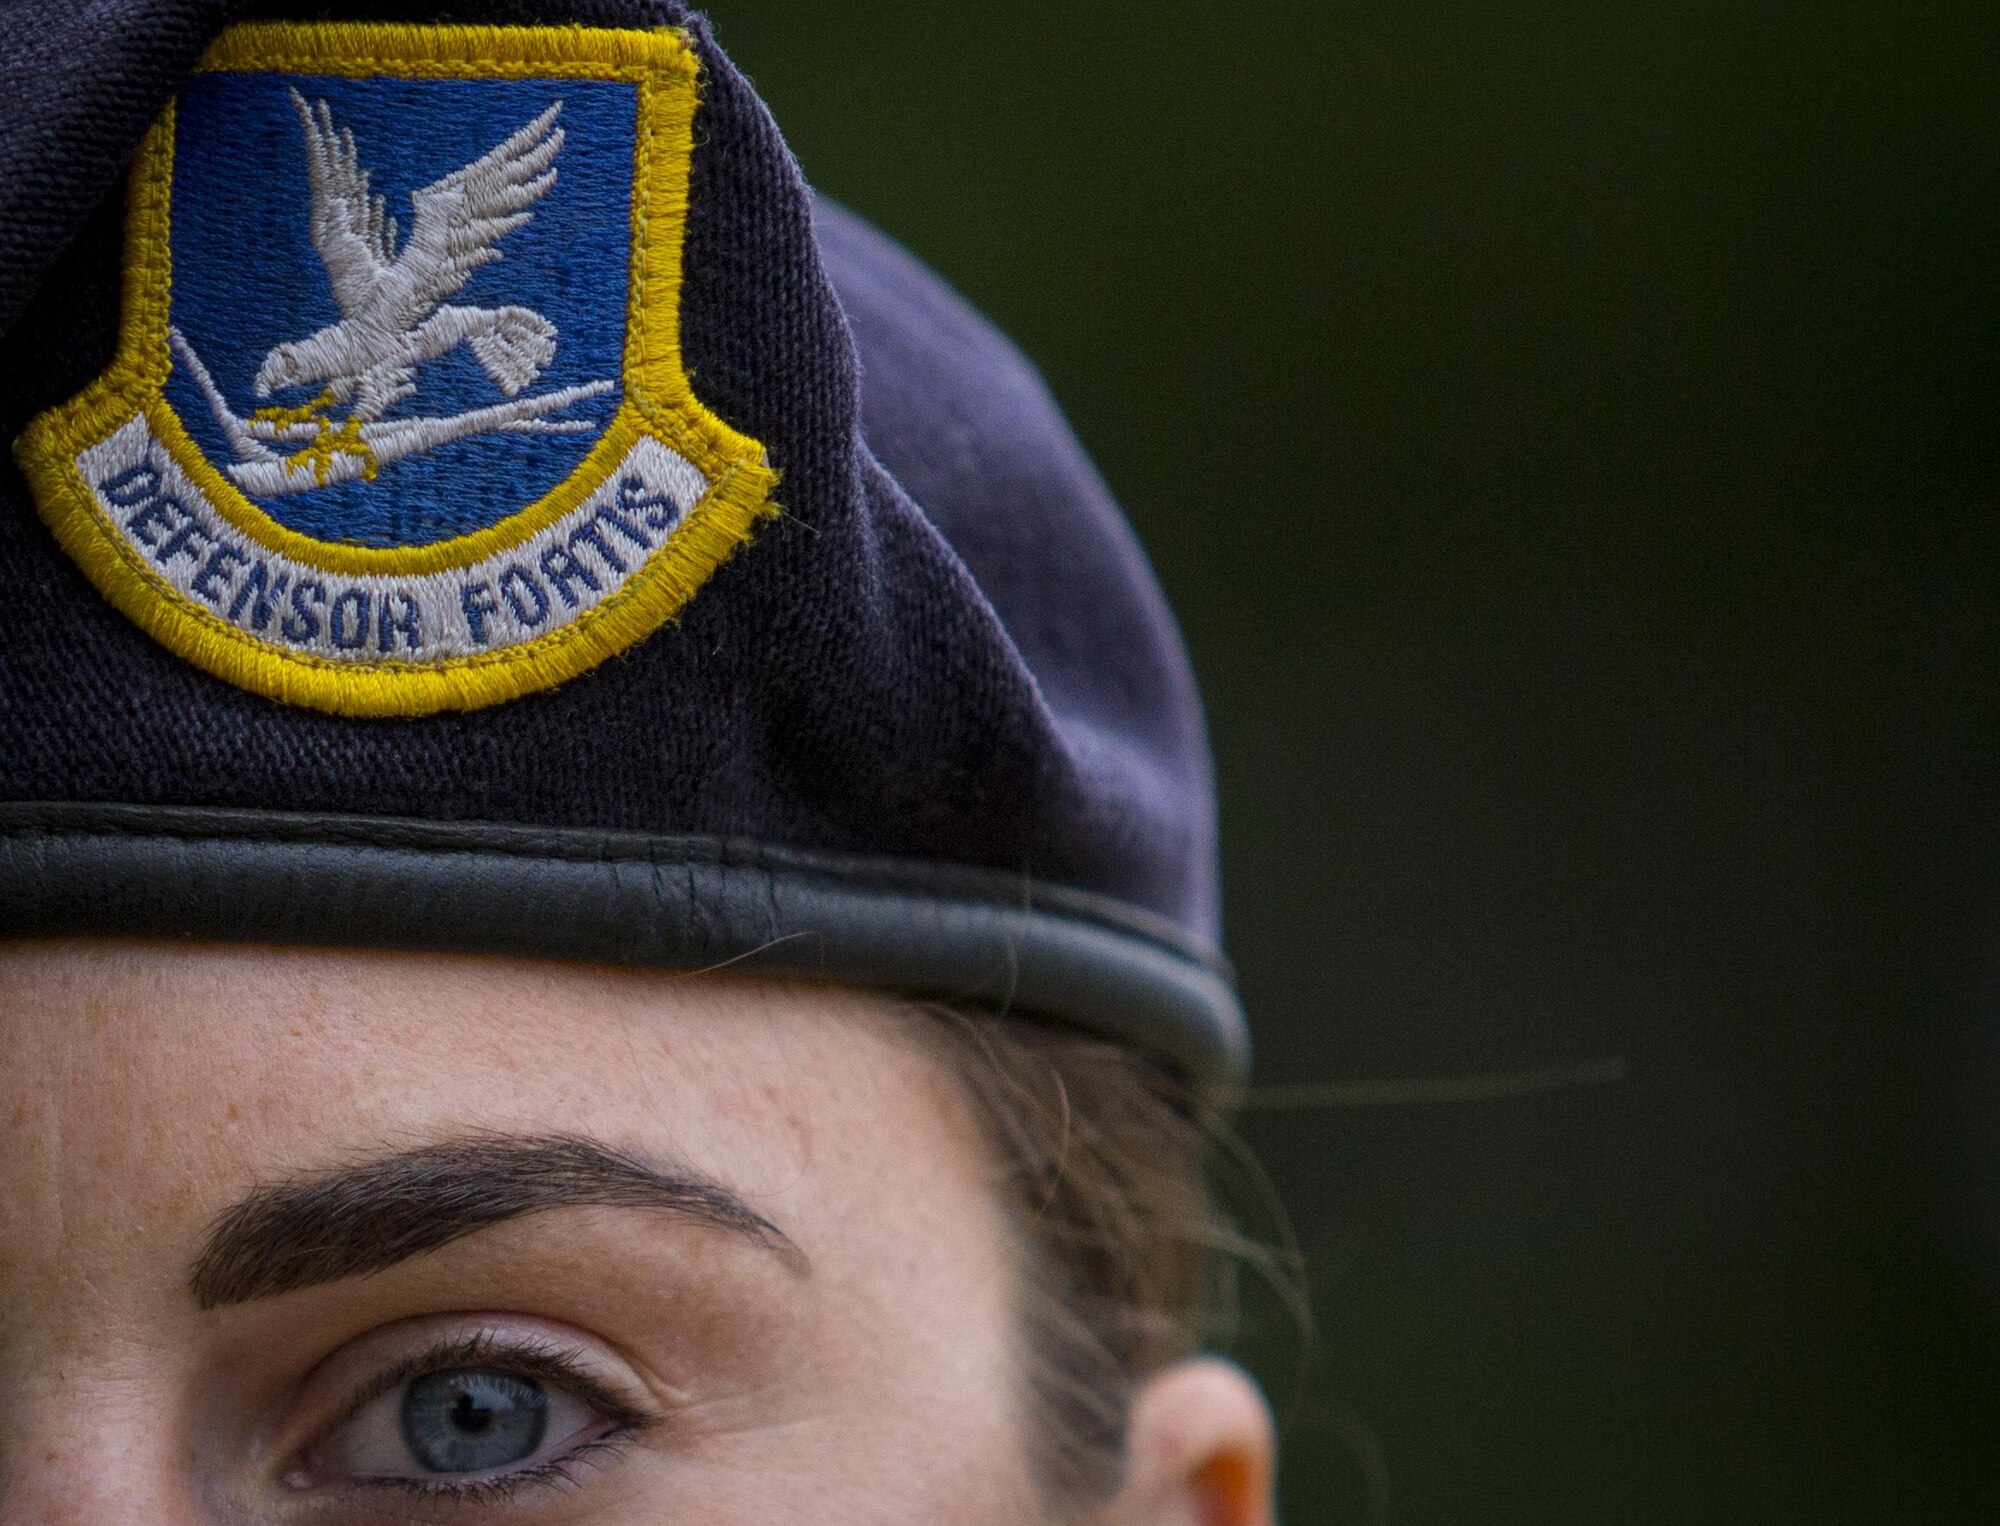 Staff Sgt. Jennifer Marchese stands for a portrait during a German Armed Forces Badge for Military Proficiency test at Joint Base McGuire-Dix-Lakehurst, N.J., Sept. 17, 2017. Marchese is assigned to the 108th Security Forces Squadron. (U.S. Air National Guard photo by Master Sgt. Matt Hecht)